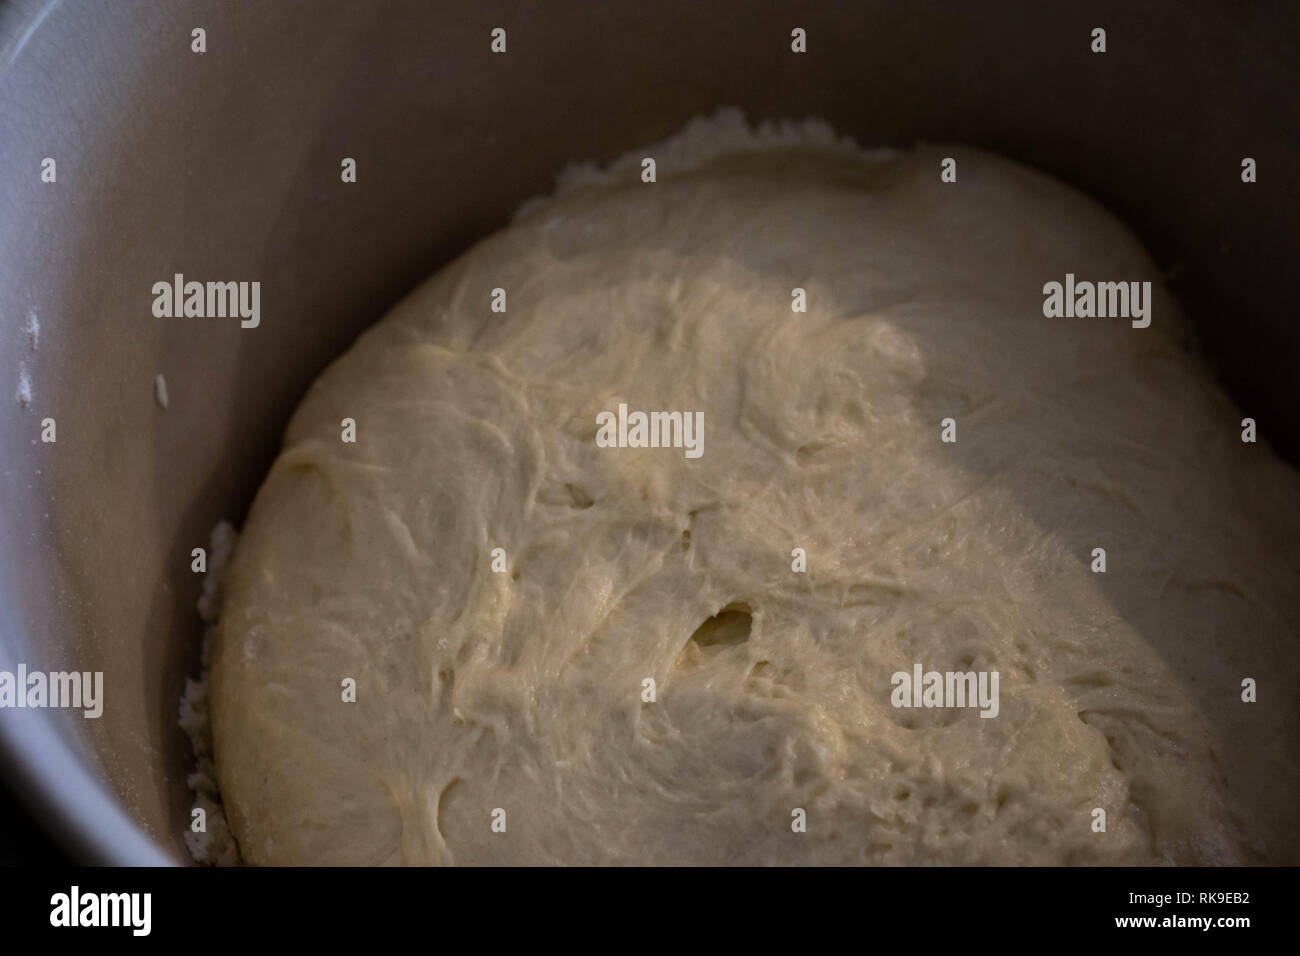 Sourdough bread dough resting in covered container before baking Stock Photo